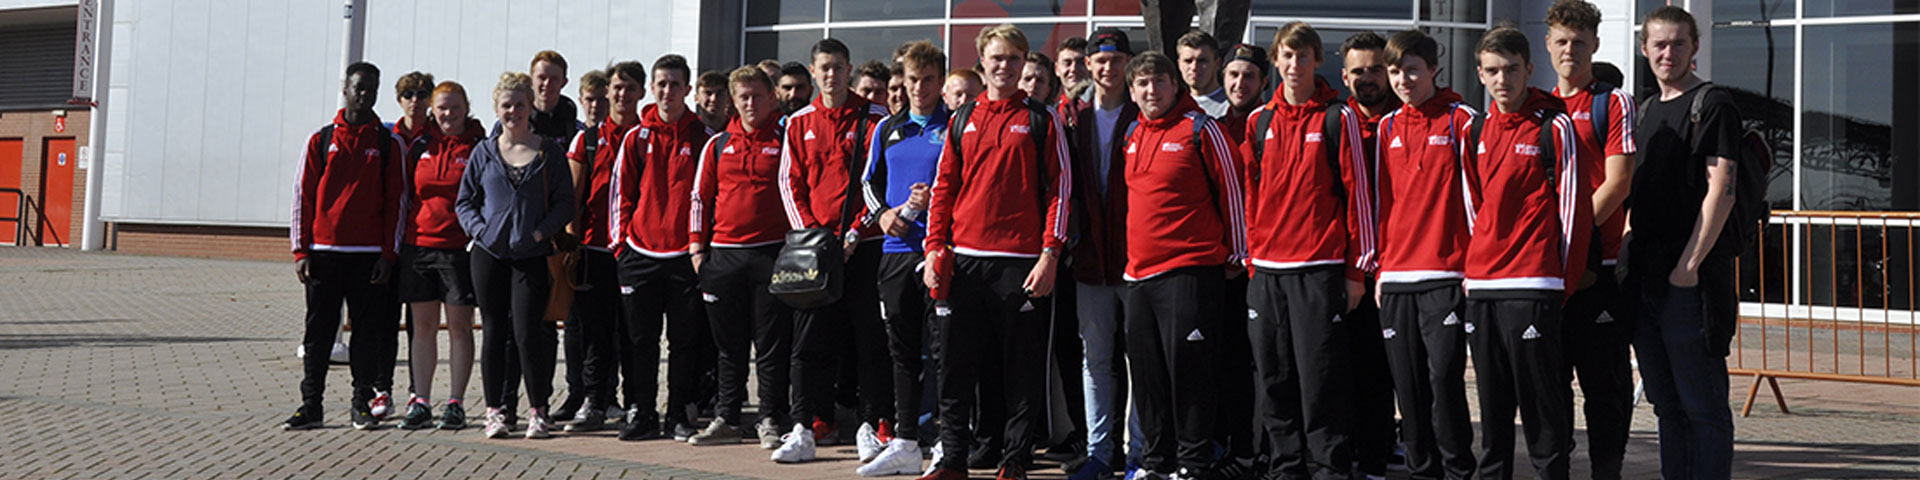 BA (Hons) Sport Coaching and Development students in front of the Ted Bates statue outside the main entrance to St Mary's Stadium